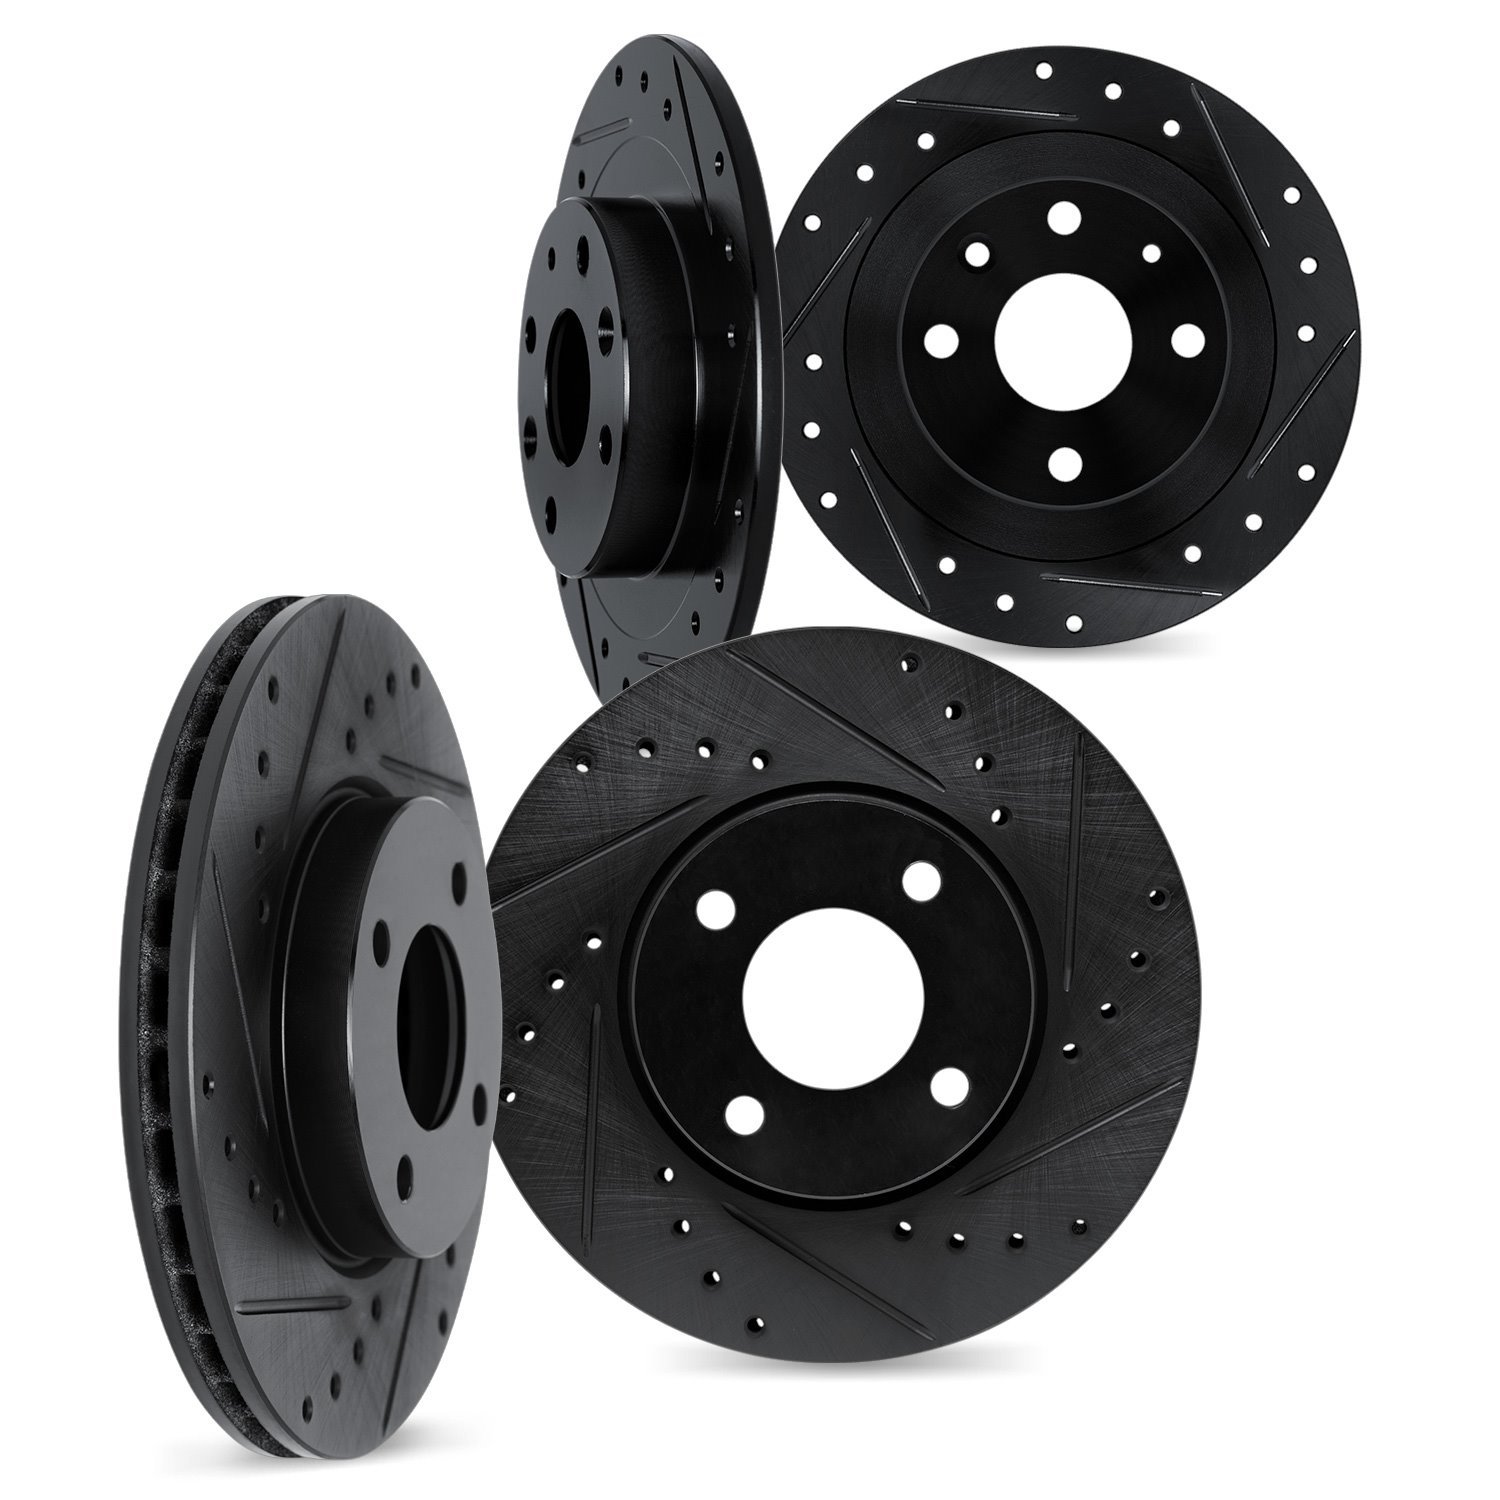 8004-67004 Drilled/Slotted Brake Rotors [Black], 1990-1996 Infiniti/Nissan, Position: Front and Rear